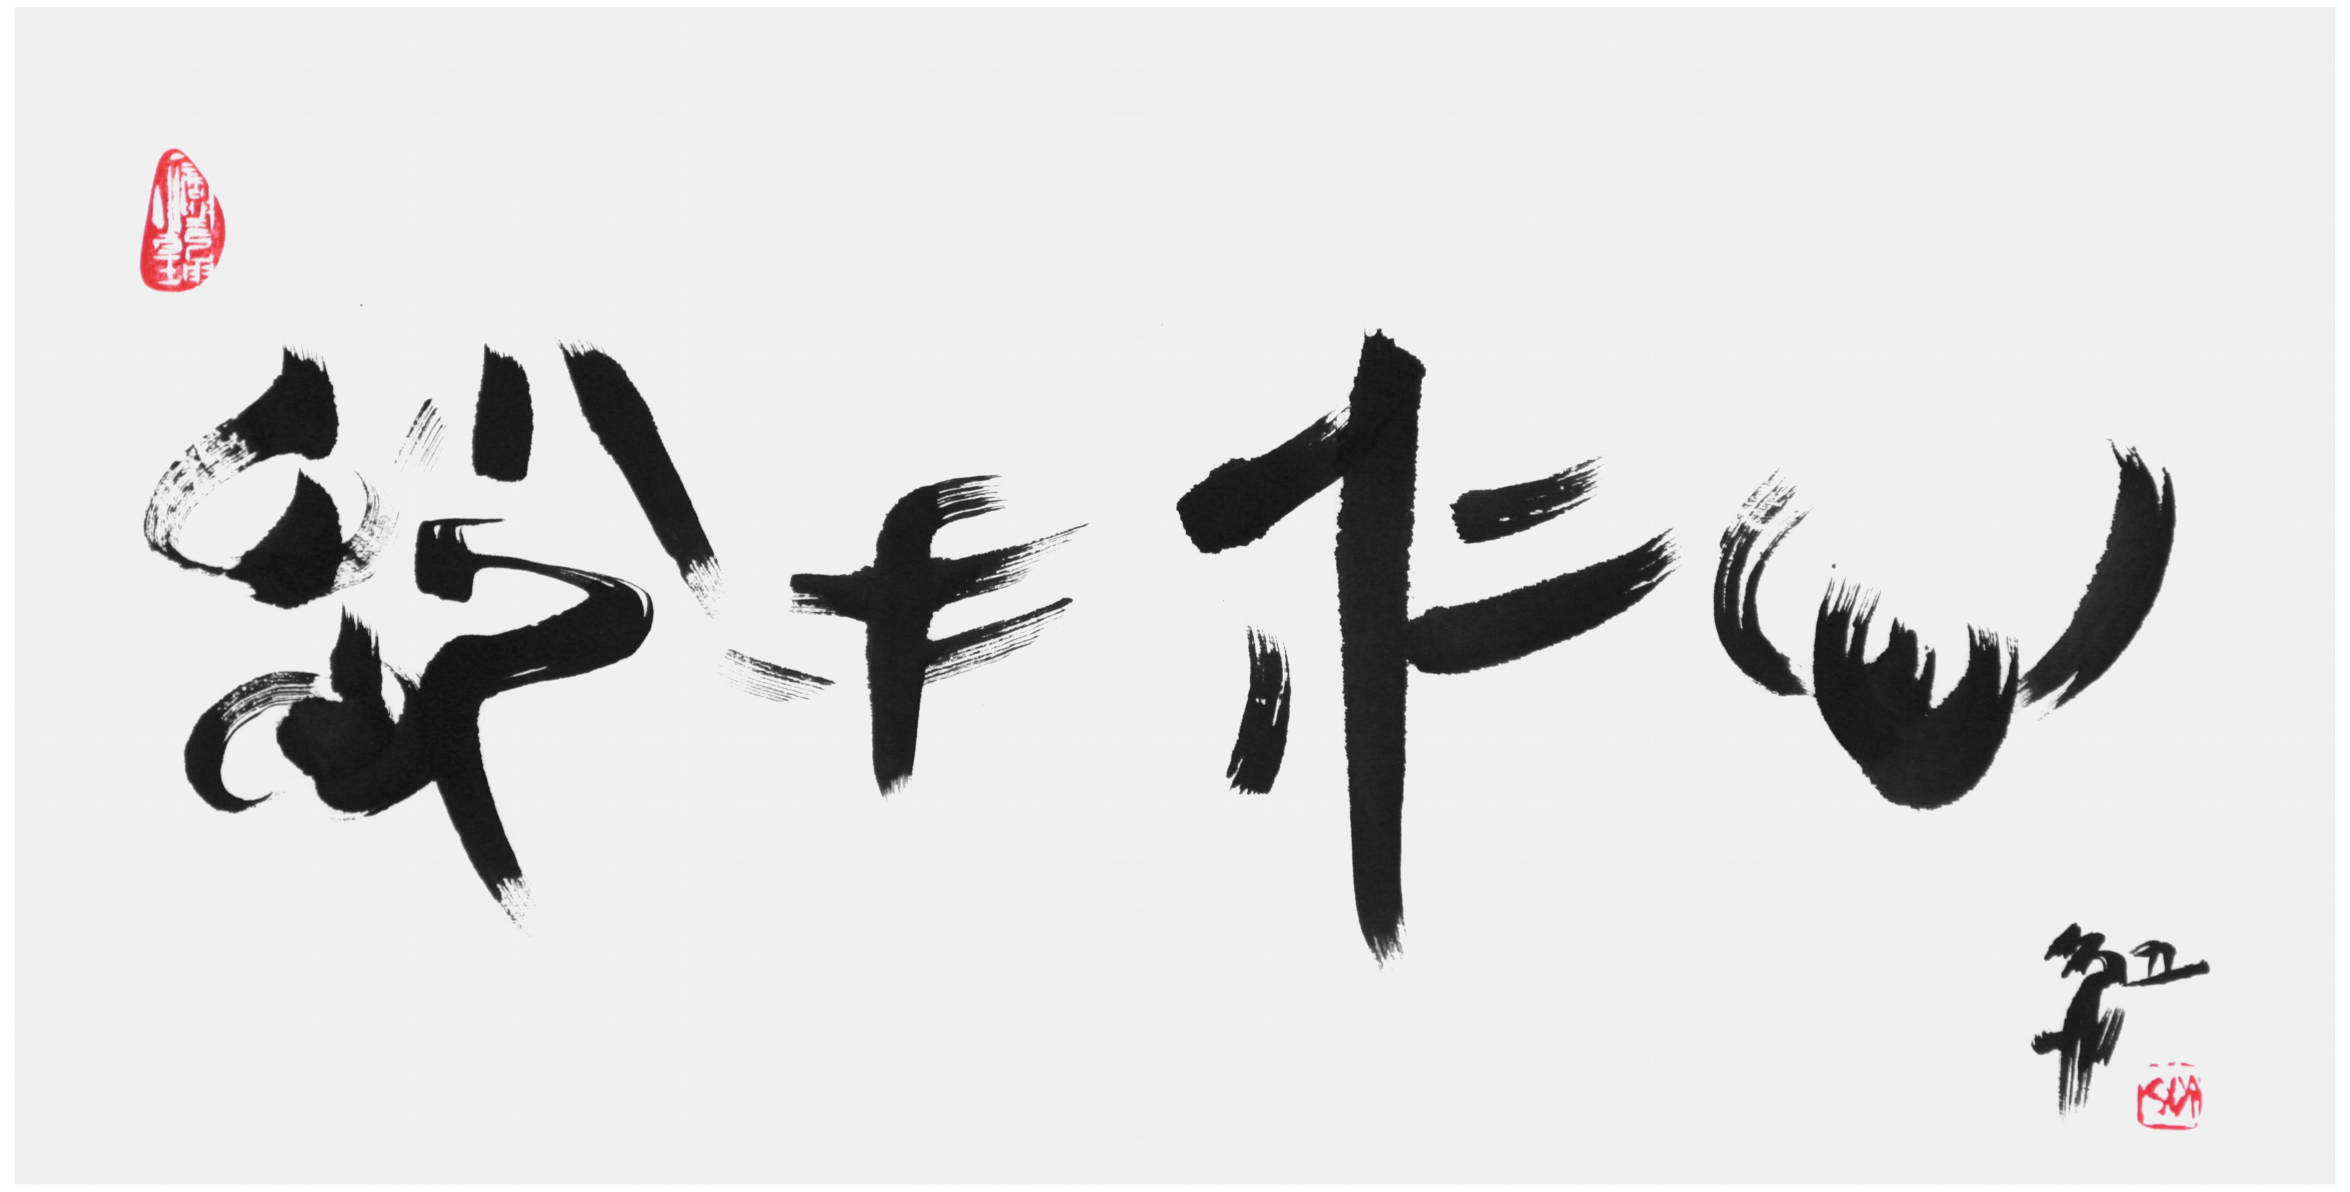 Qi Hong (Sai Koh) 's freehand brushwork style semi-seal script Chinese calligraphy, Benevolence and Highly Skilled Hands, 69×34cm, Ink - Qi Hong (Sai Koh) Calligraphy Web